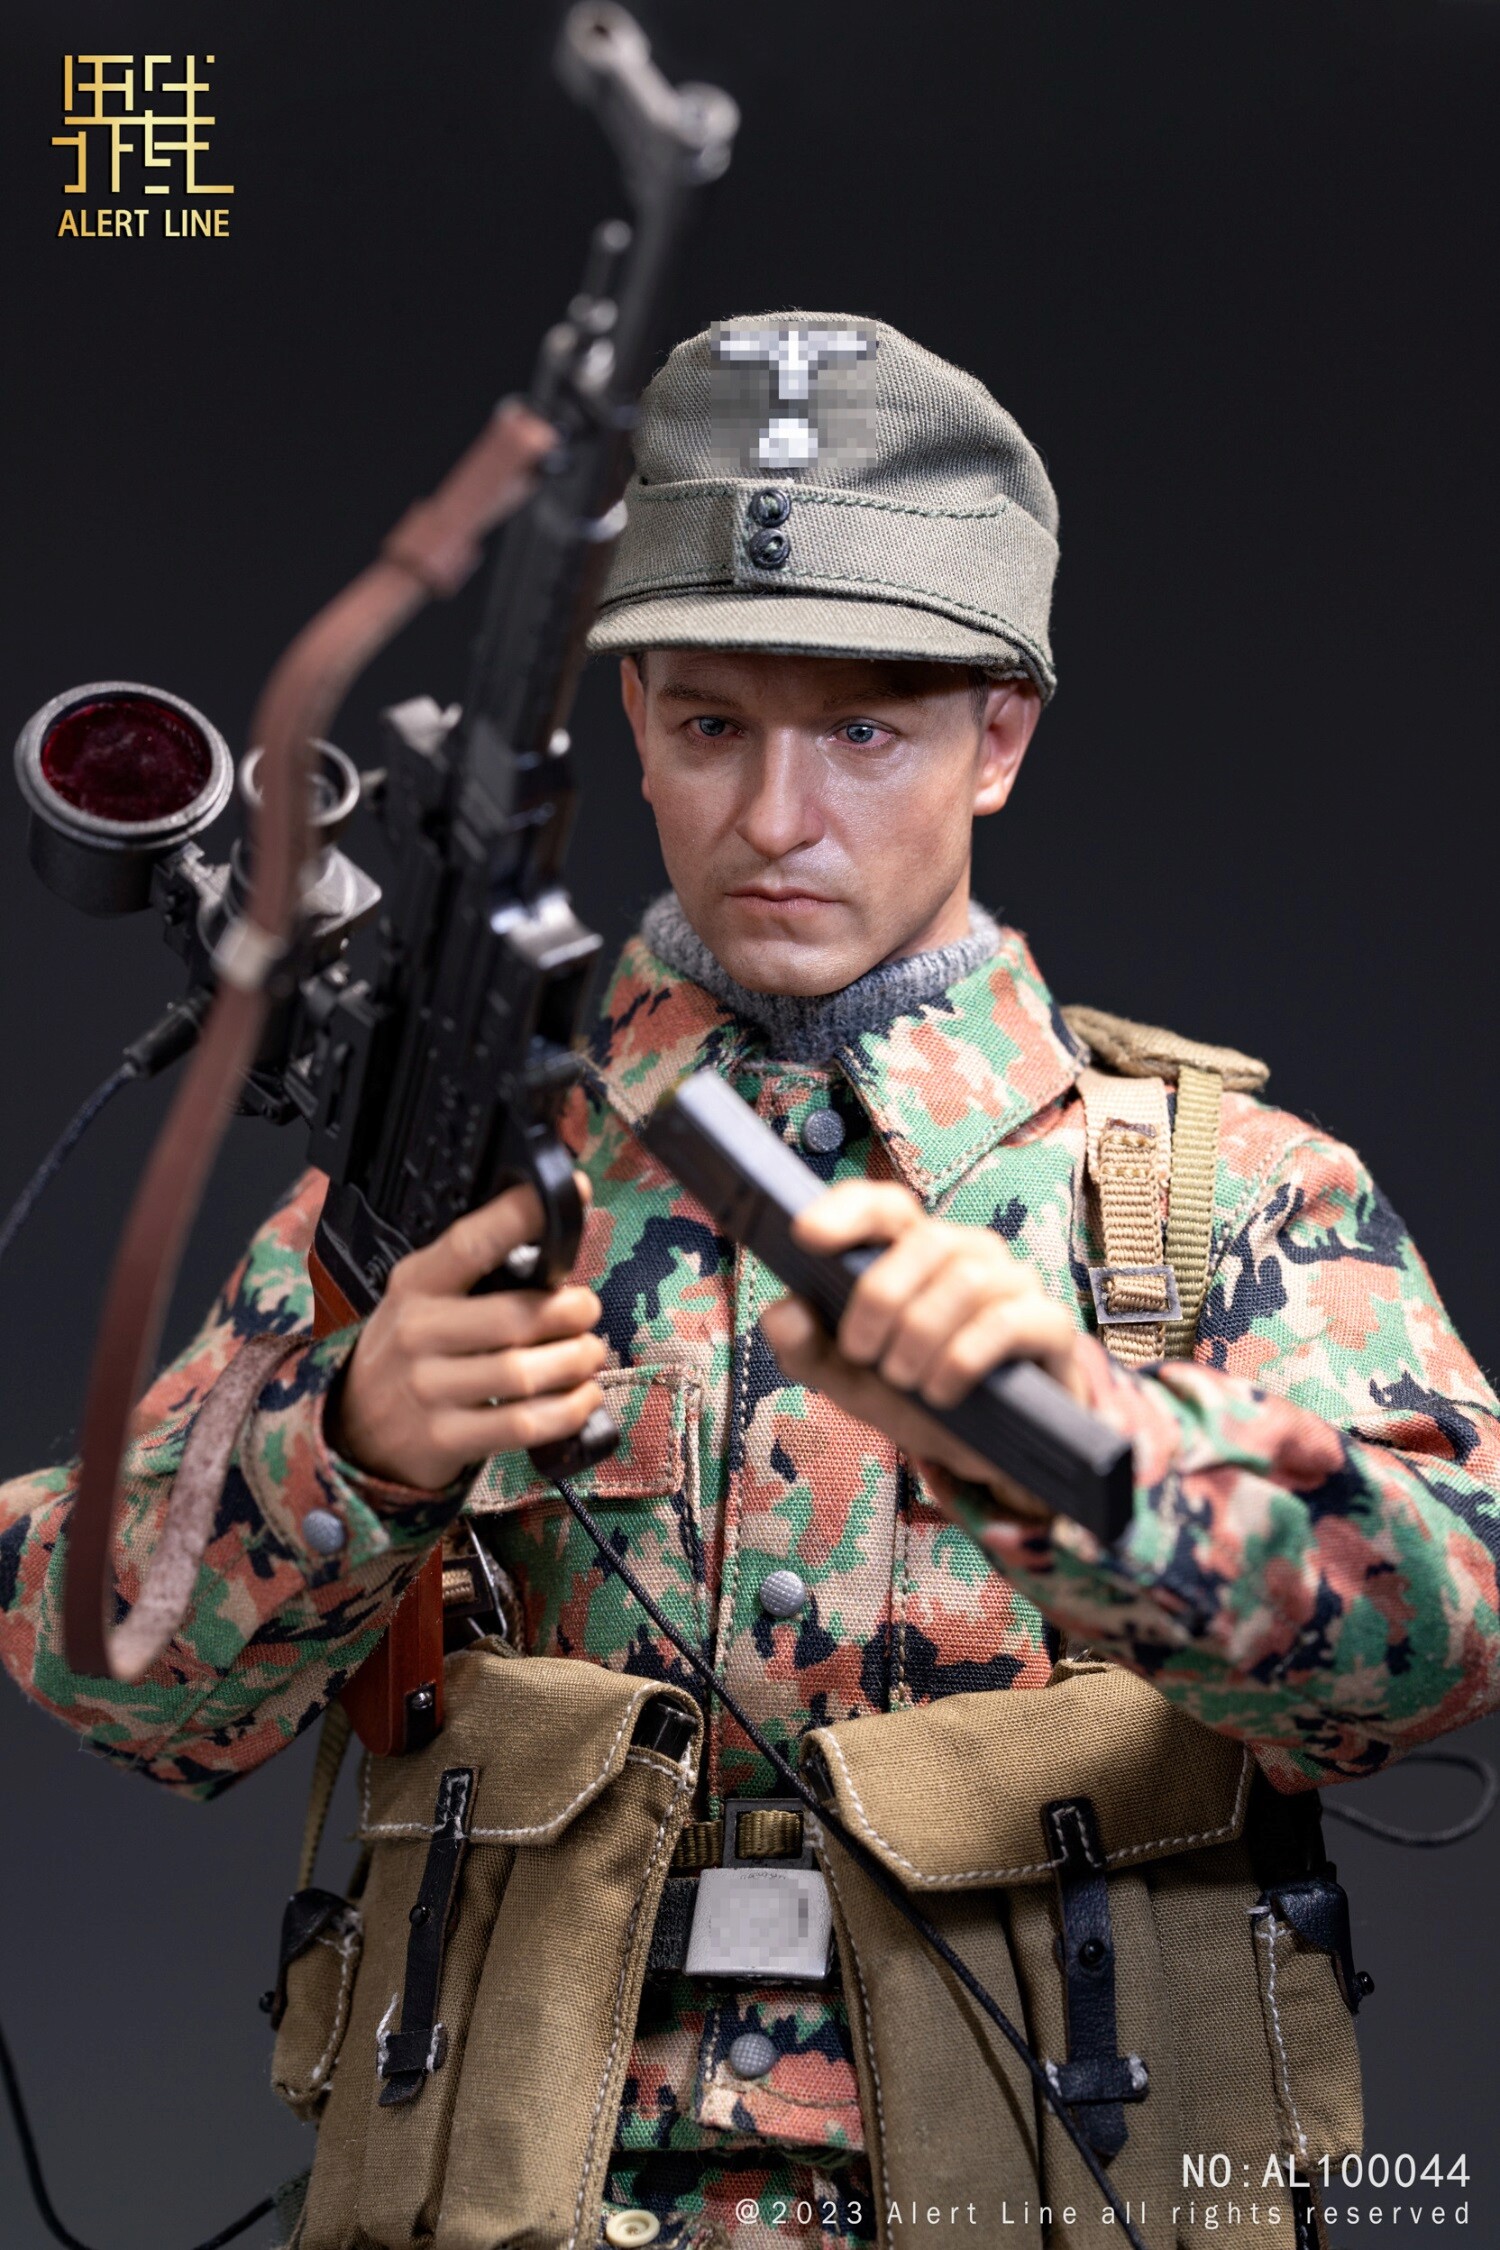 military - NEW PRODUCT: Boundary Play Model - World War II German Waffen SS Soldier (AL100044) 12236